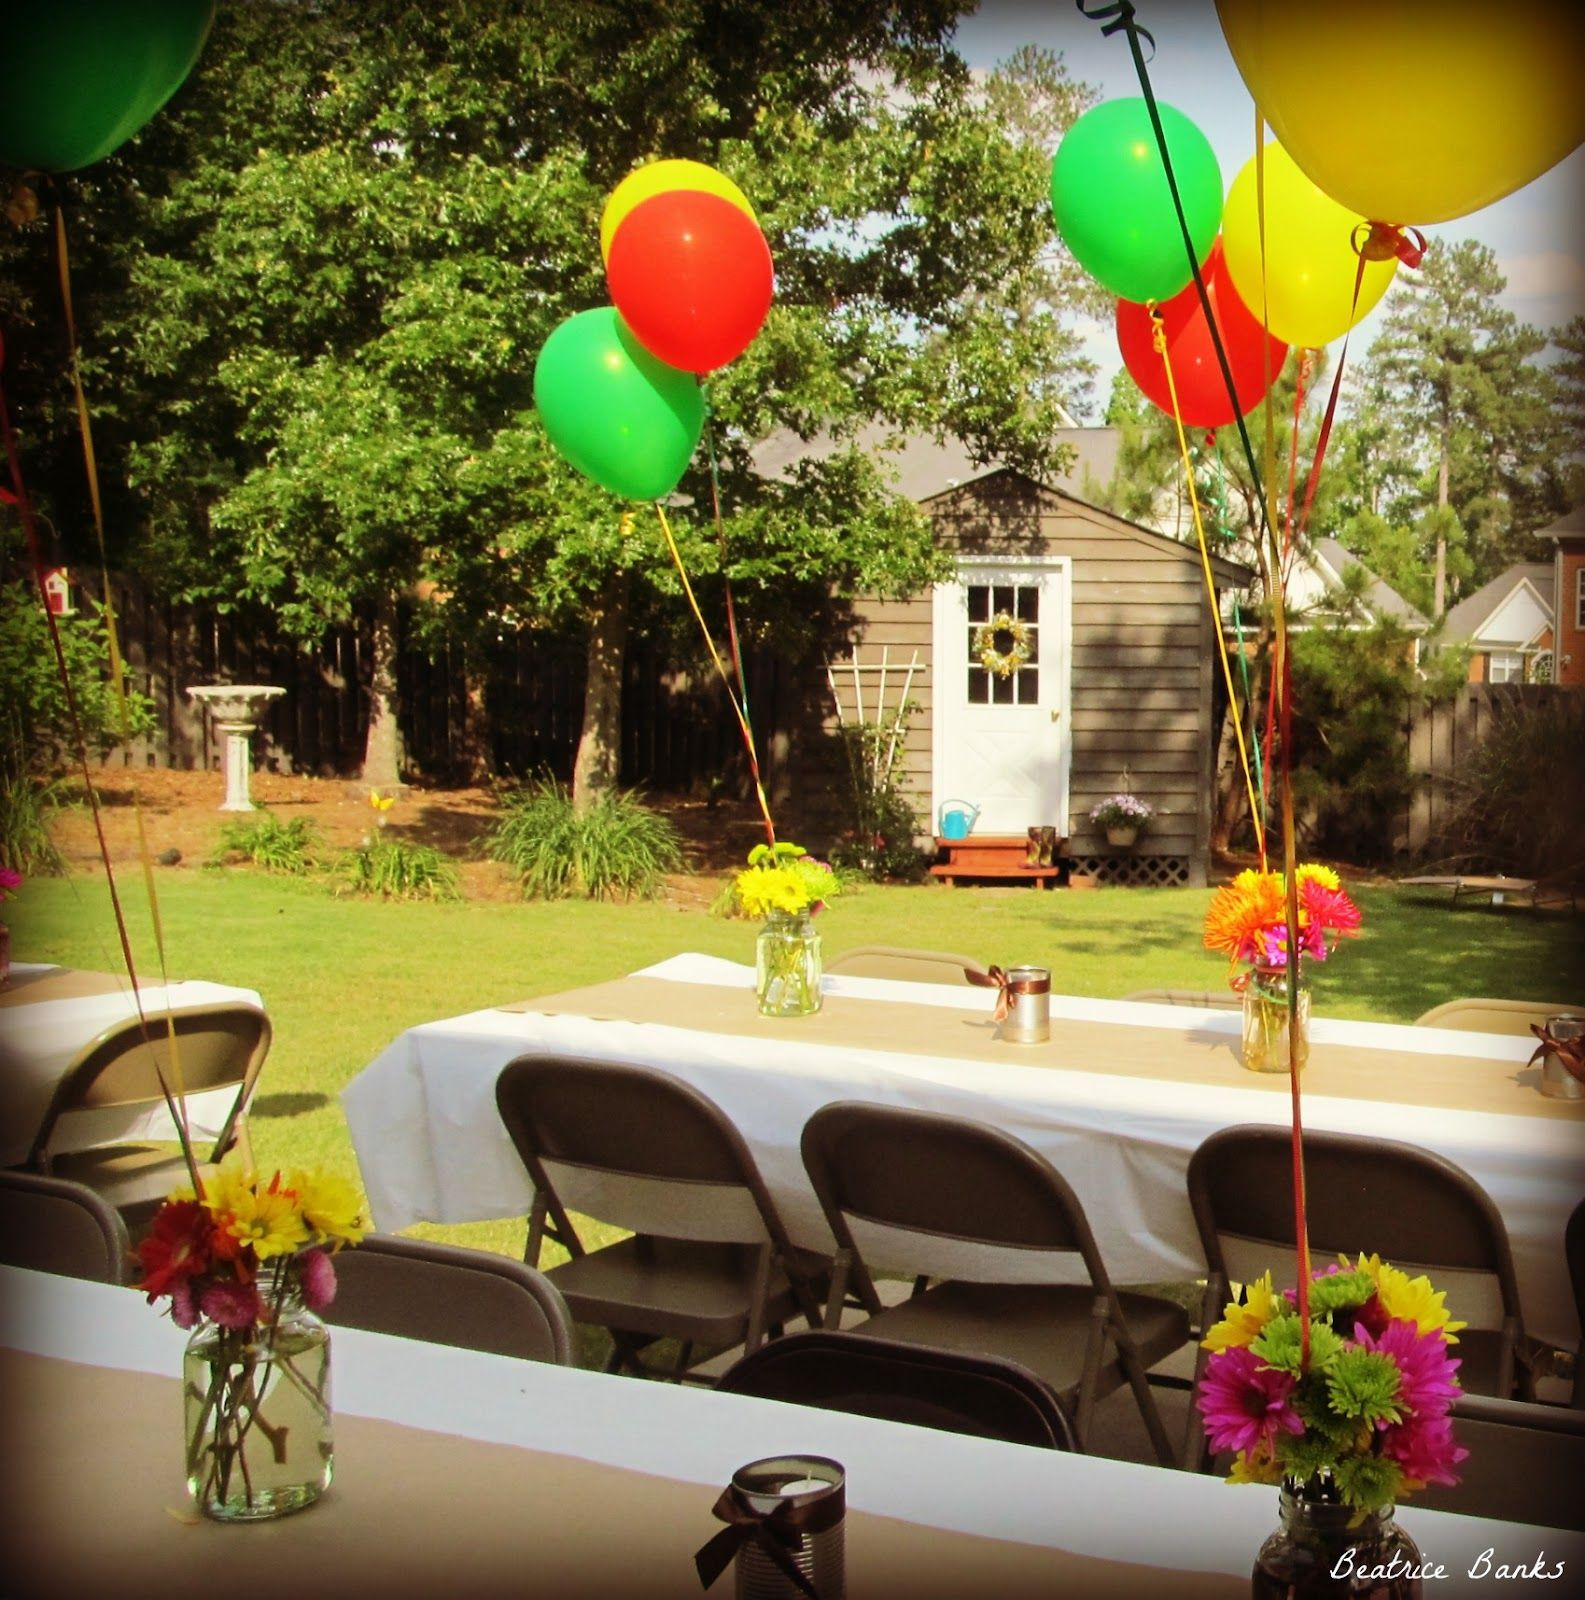 Graduation Party Backyard Ideas
 Backyard Graduation Party Beatrice Banks With images